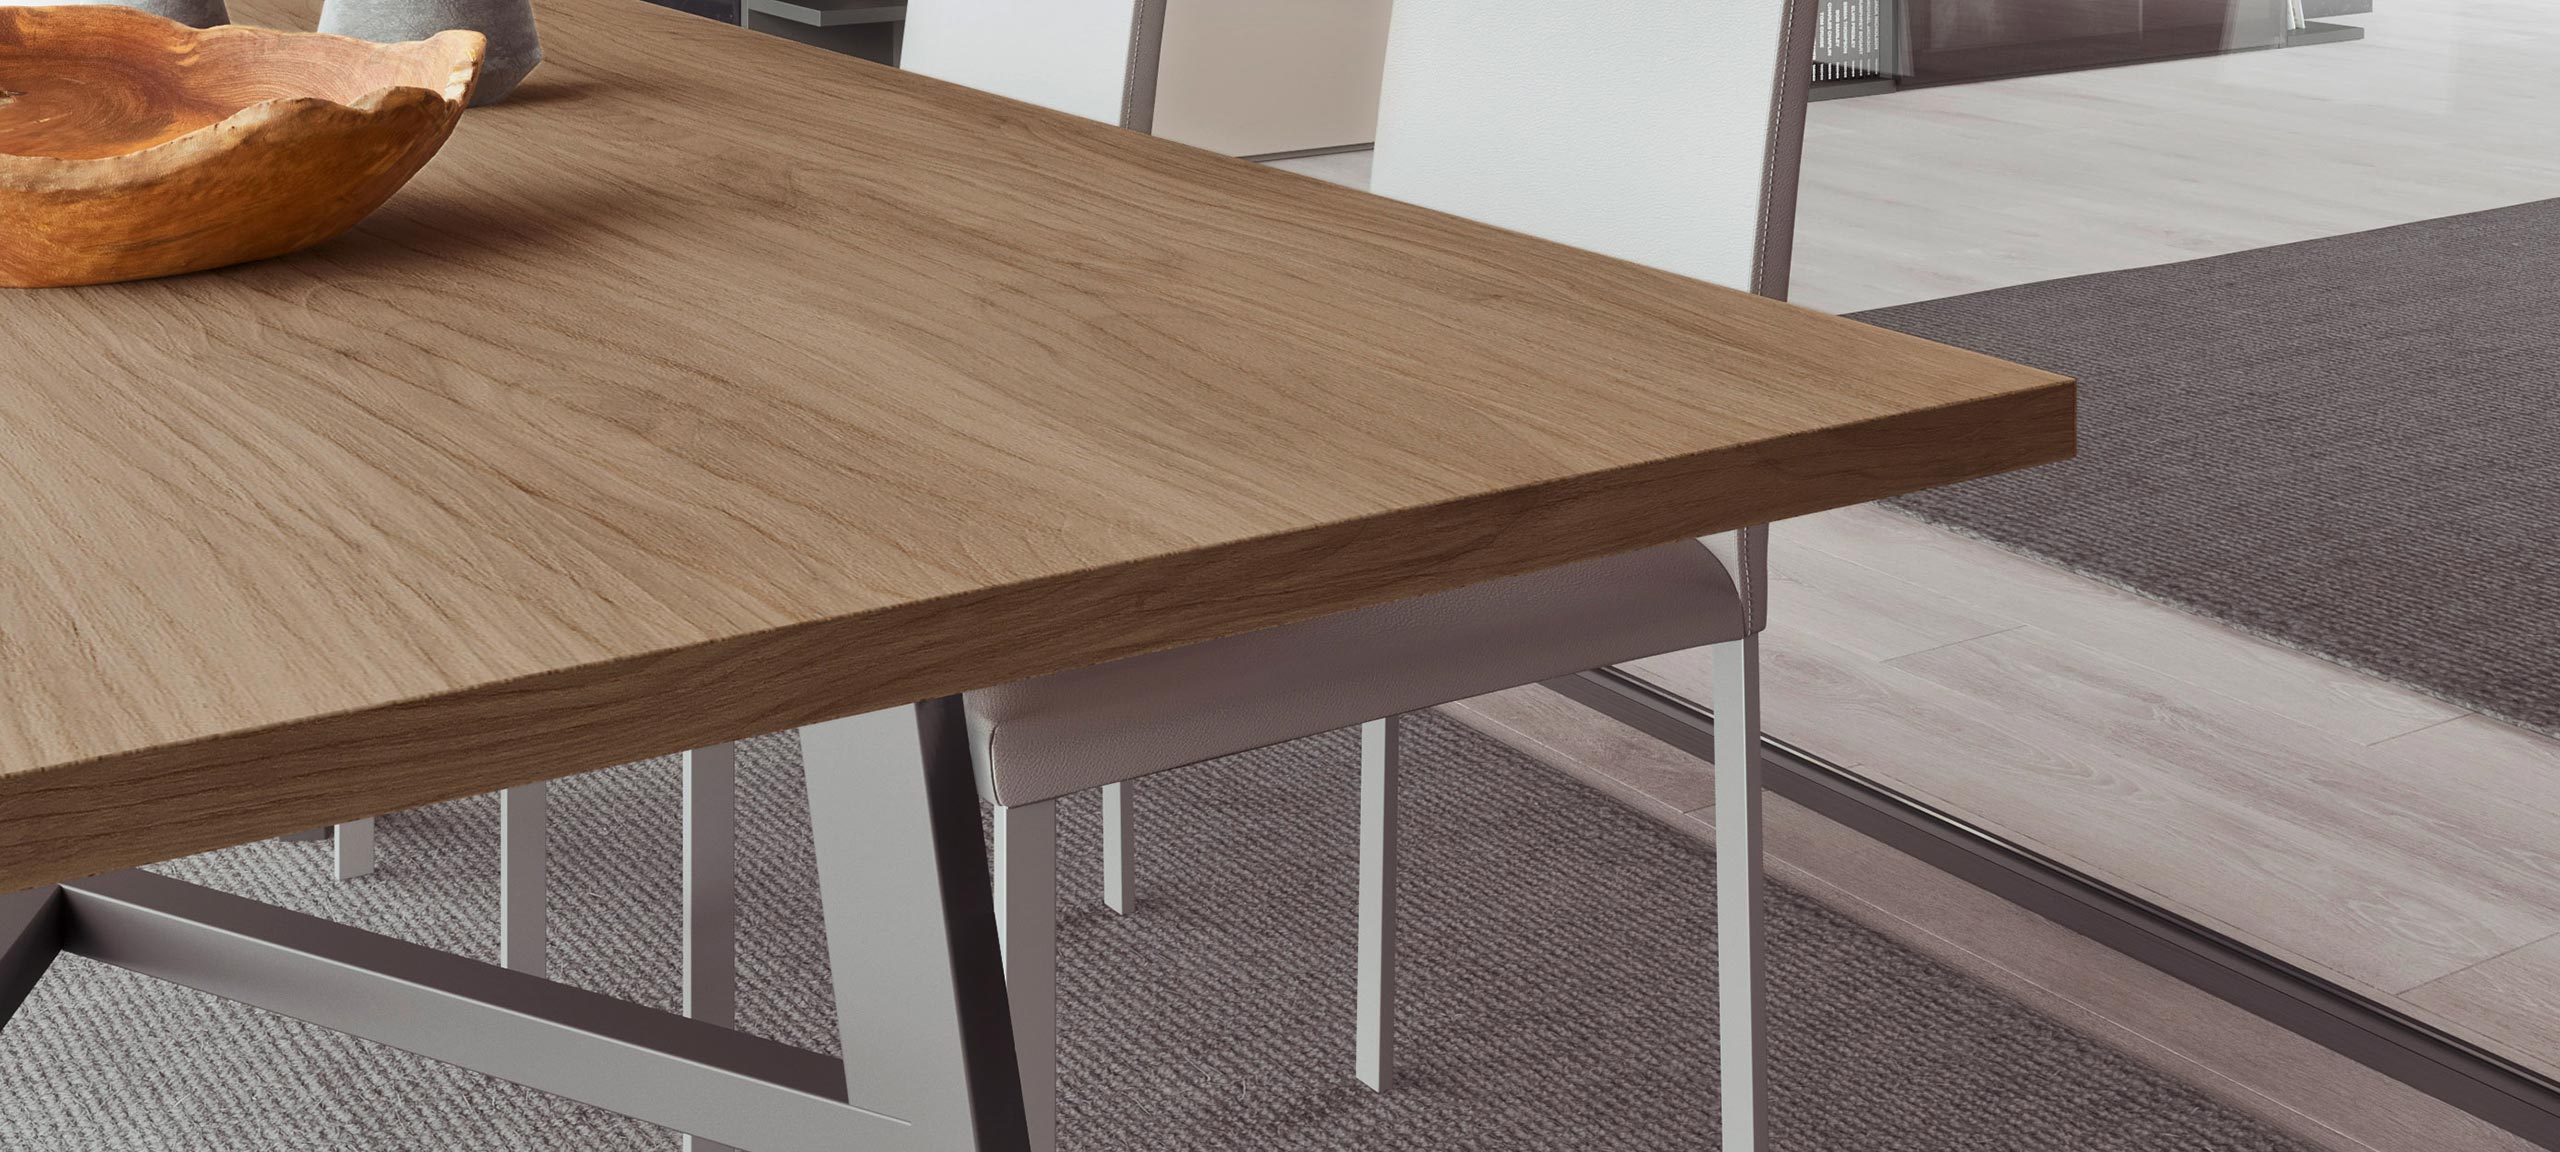 modern, extendable dining table 2